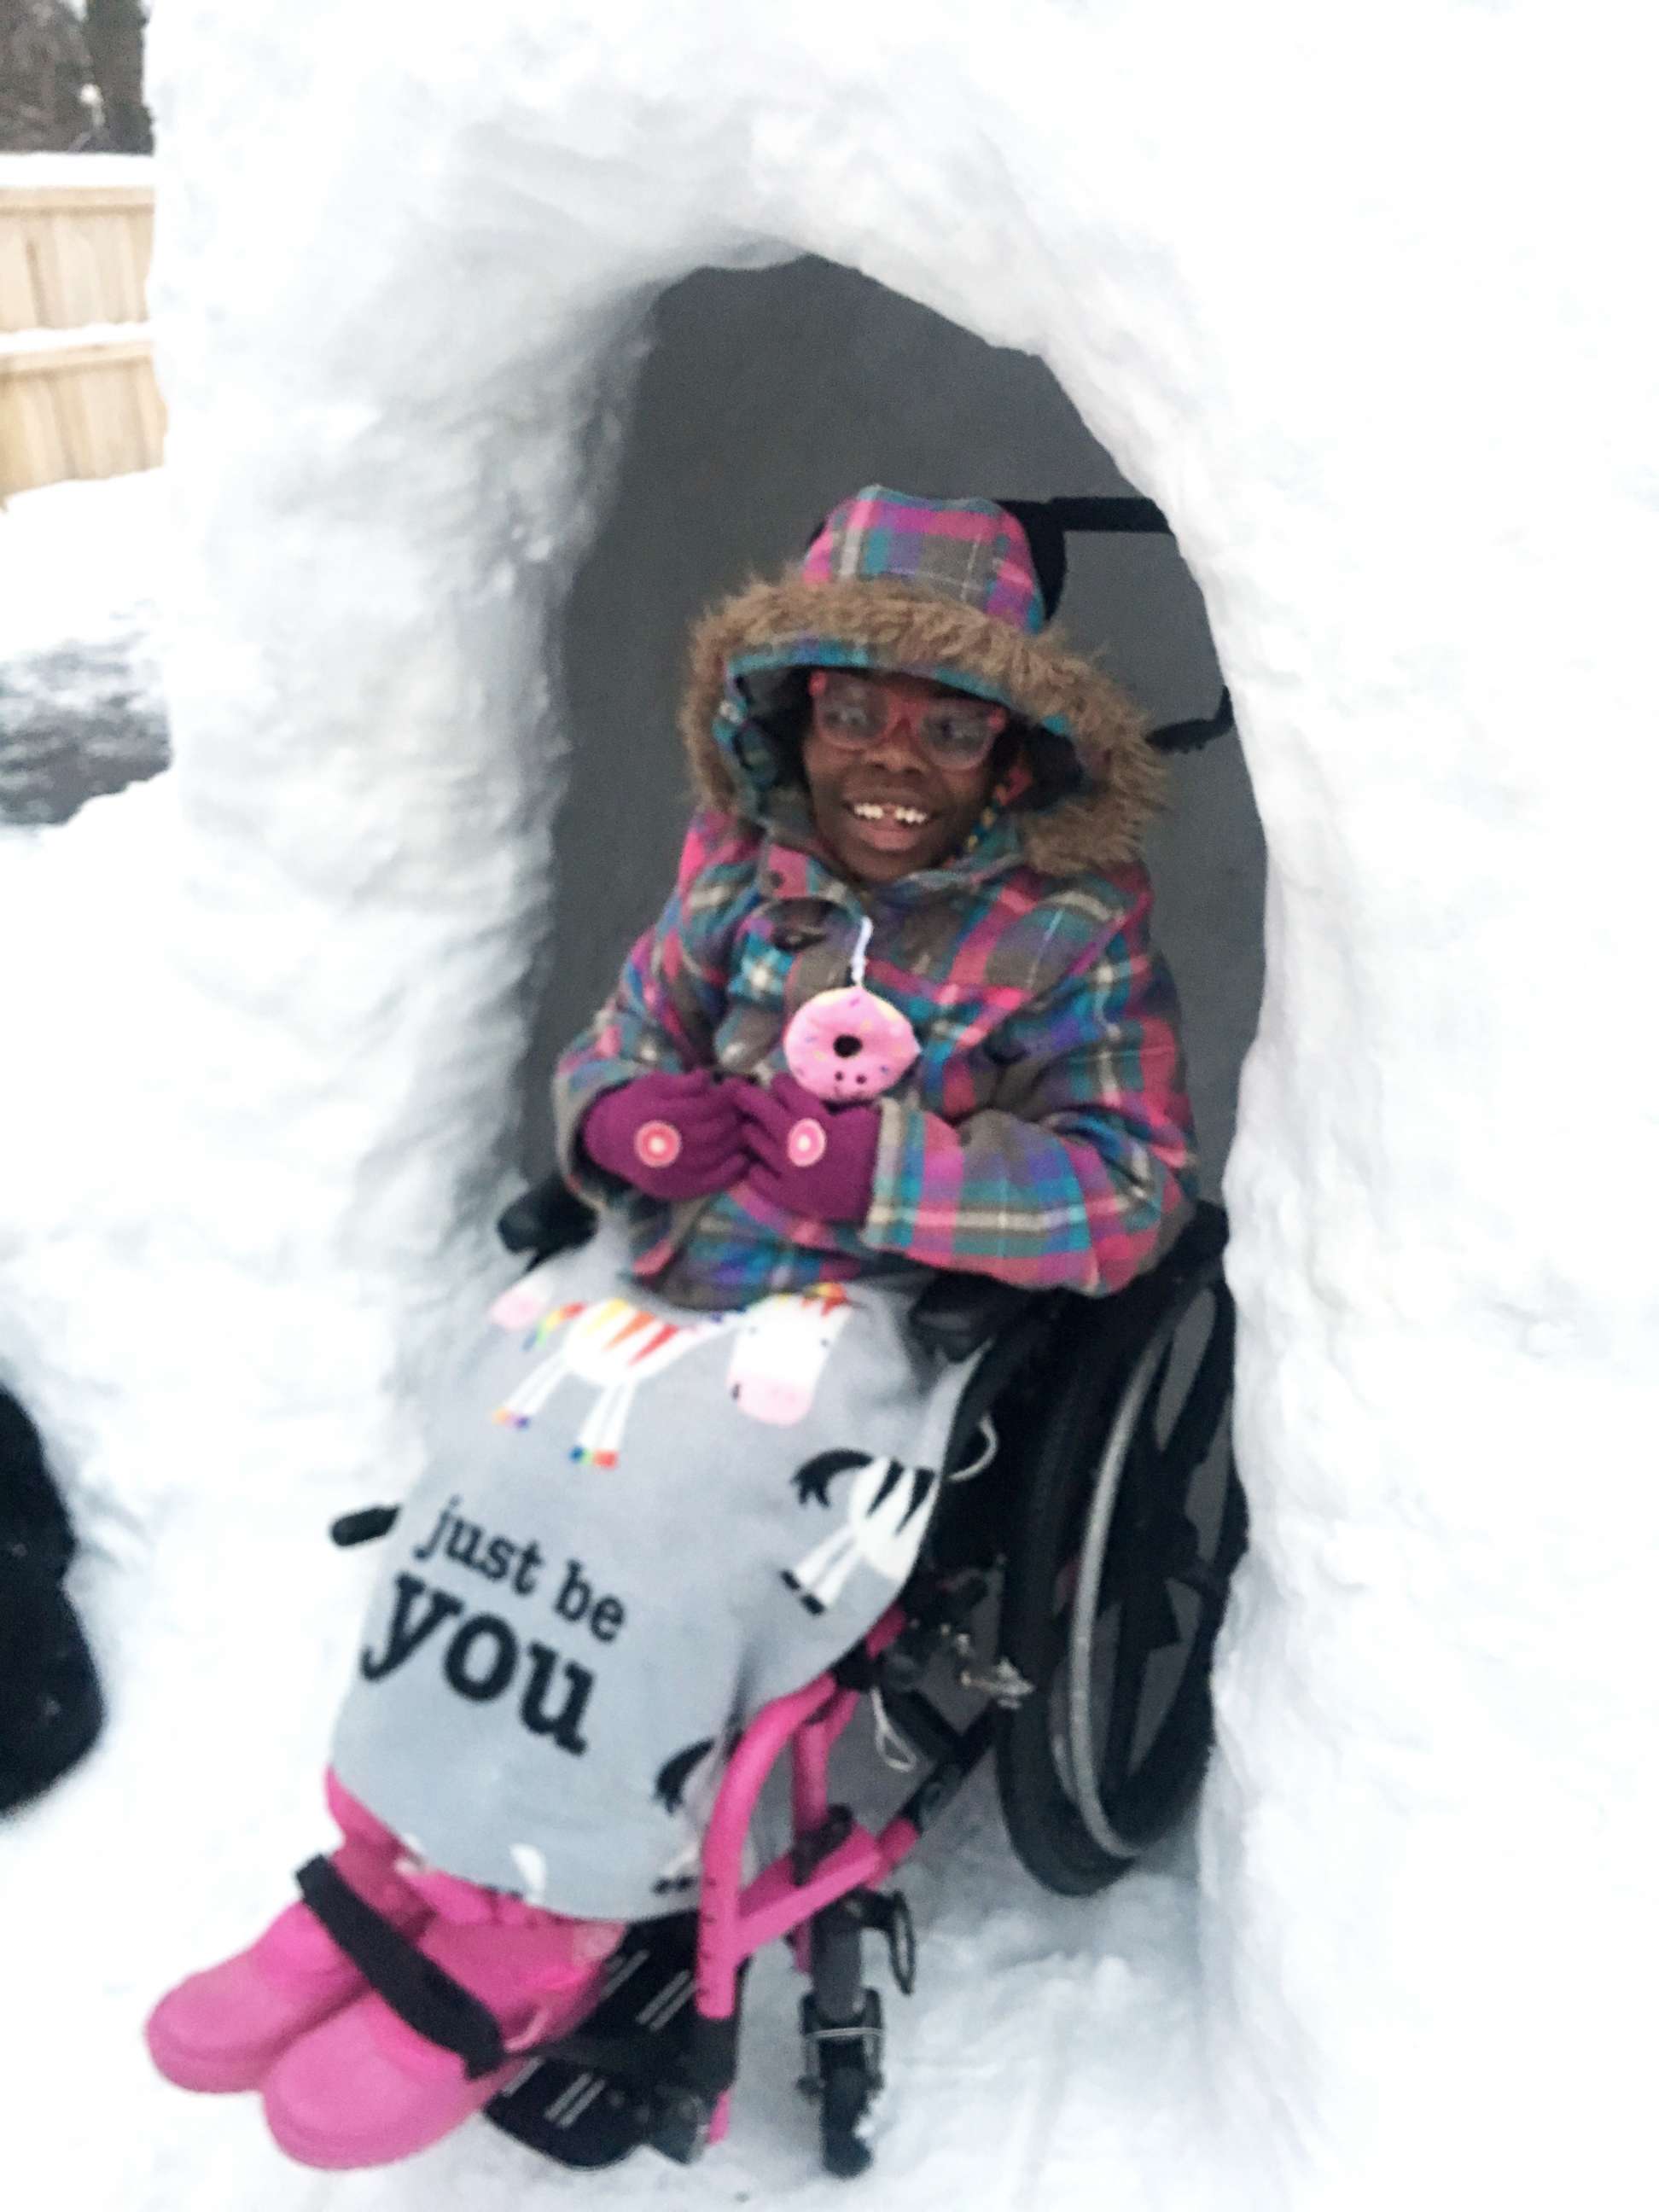 PHOTO: Zahara Eichhorn, of Ohio, poses in a snow fort built in her family's backyard.